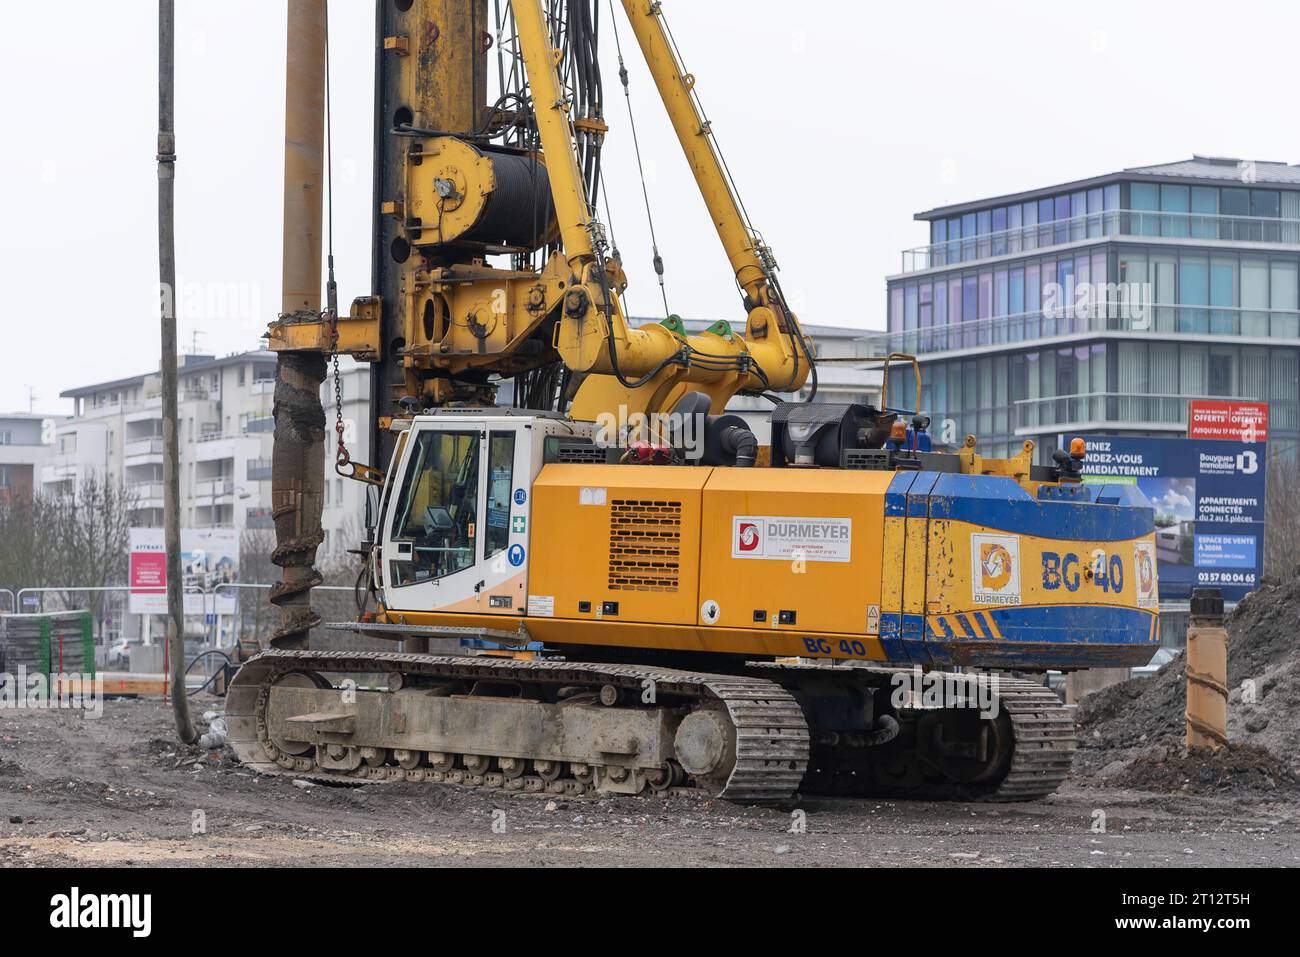 Yellow drilling rig Bauer BG 40 on construction site Stock Photo